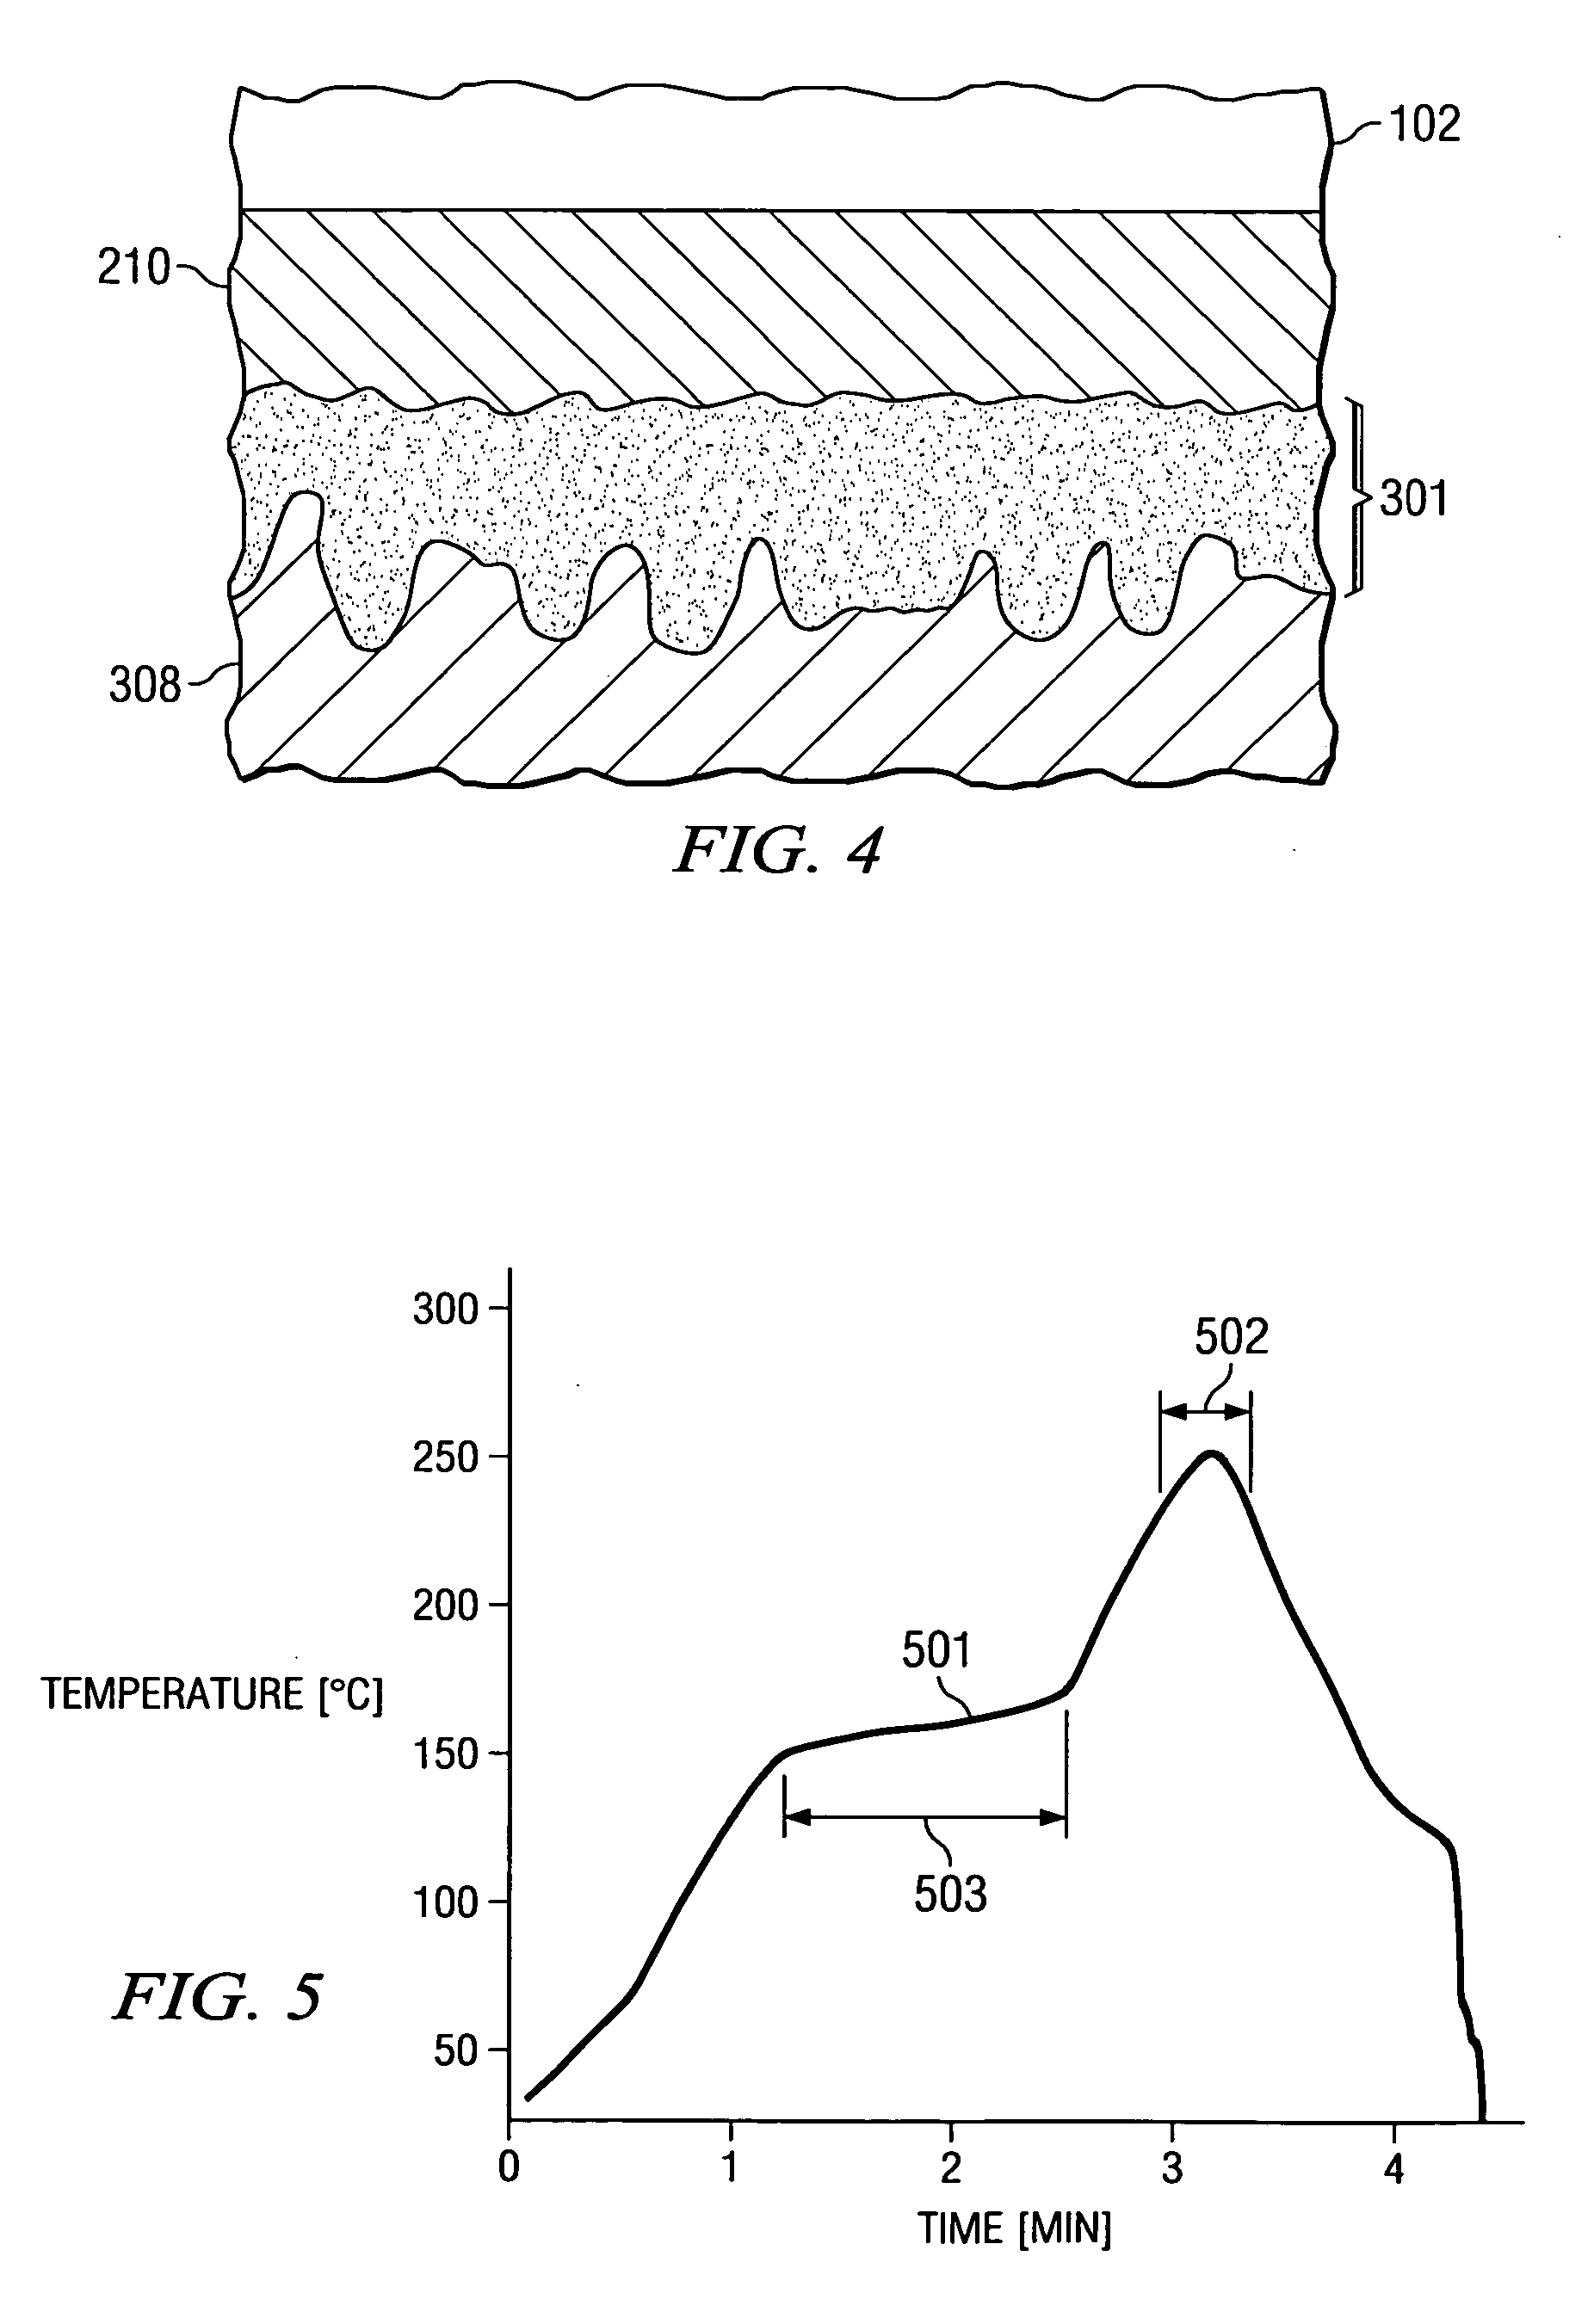 Semiconductor device having improved mechanical and thermal reliability